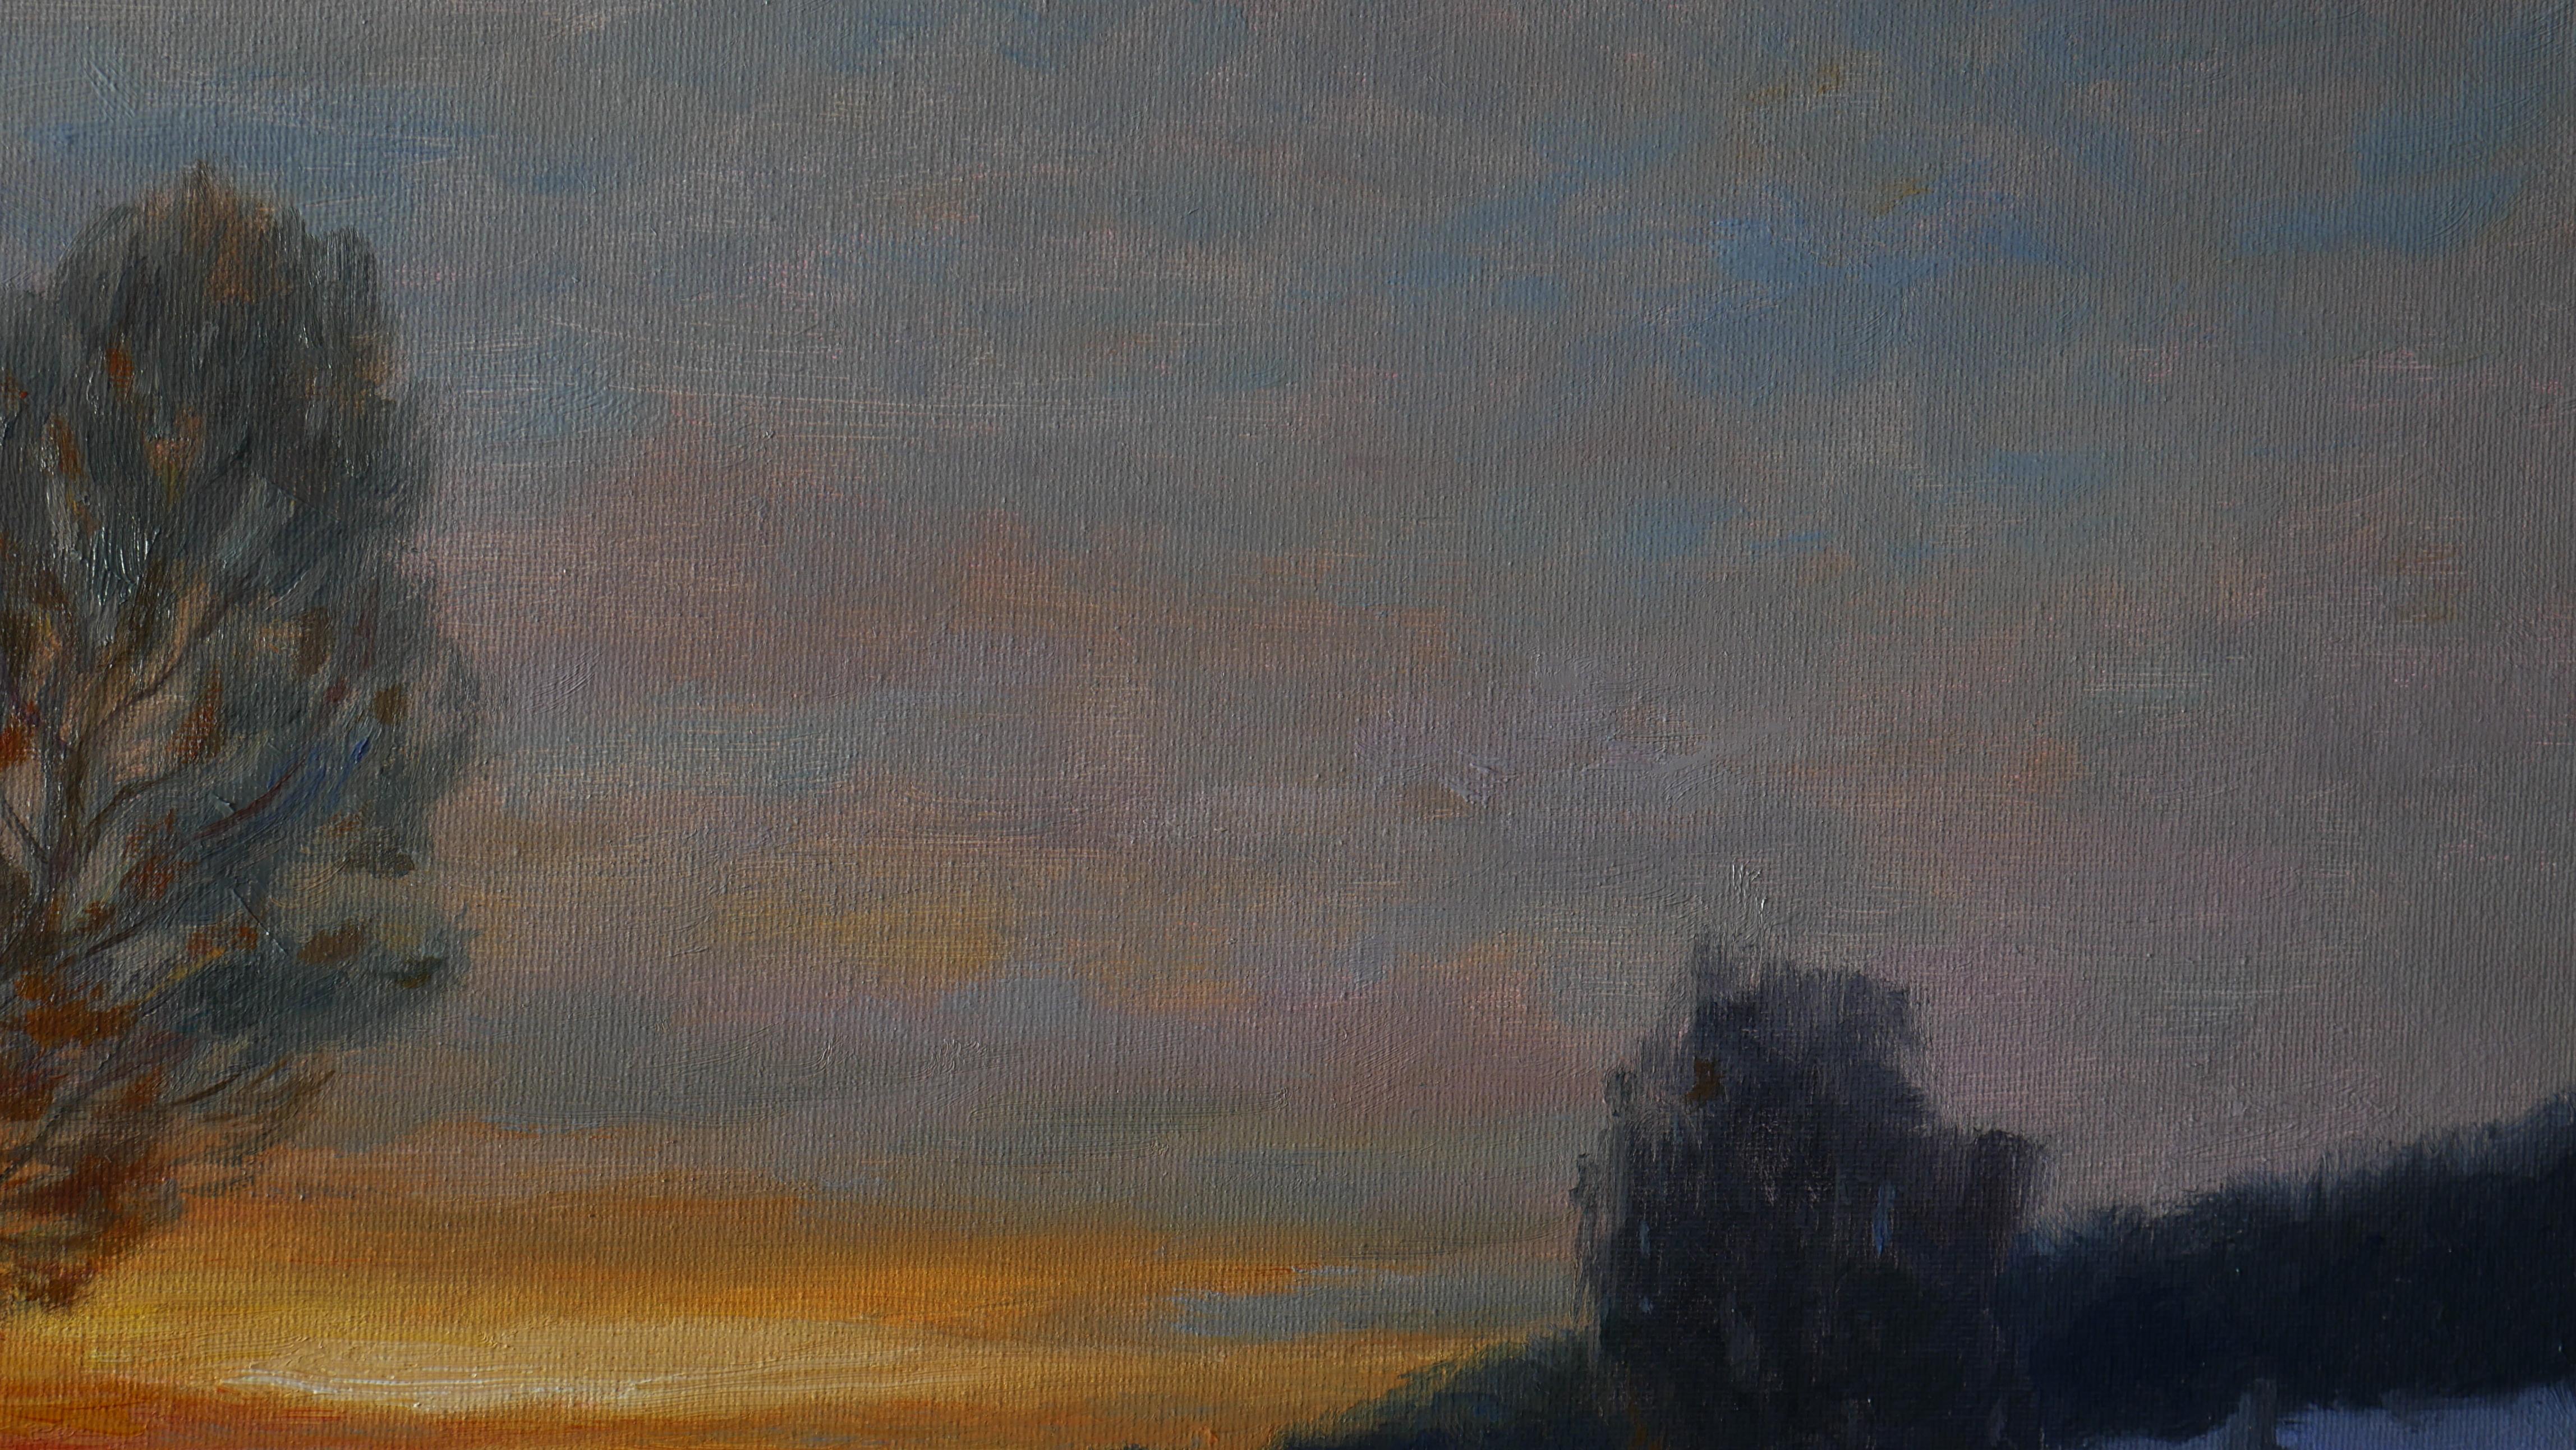 Fleeting - winter evening landscape painting For Sale 4